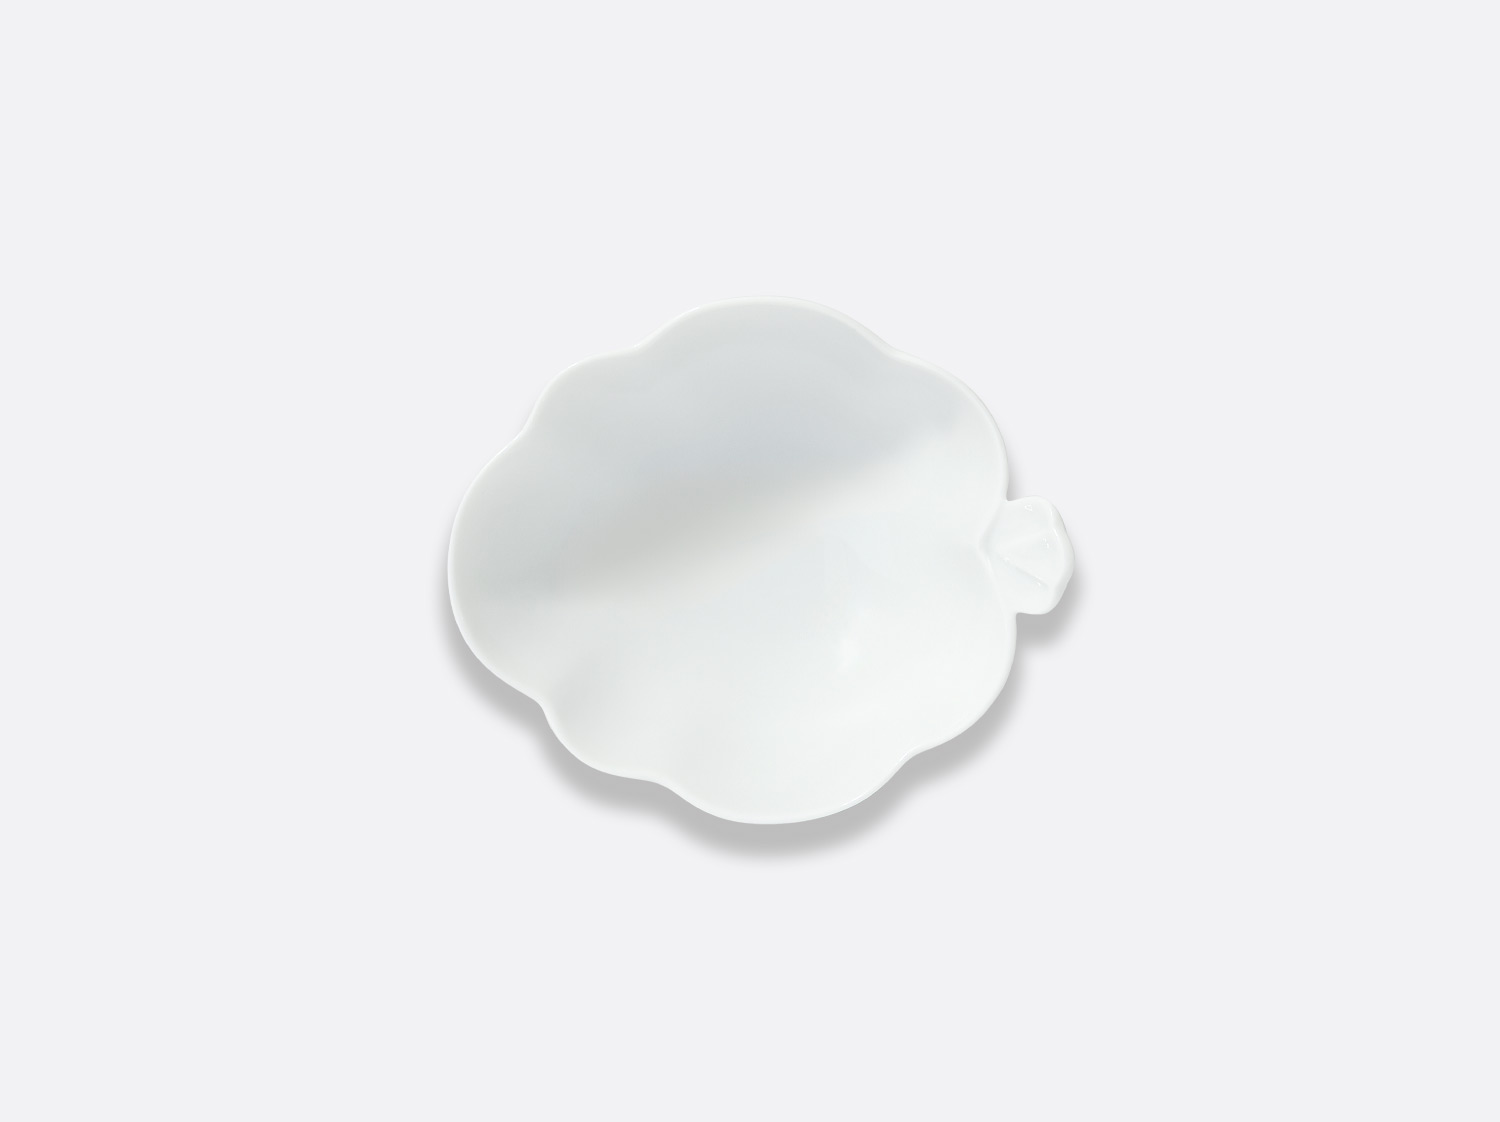 China Candy dish of the collection CLUNY | Bernardaud